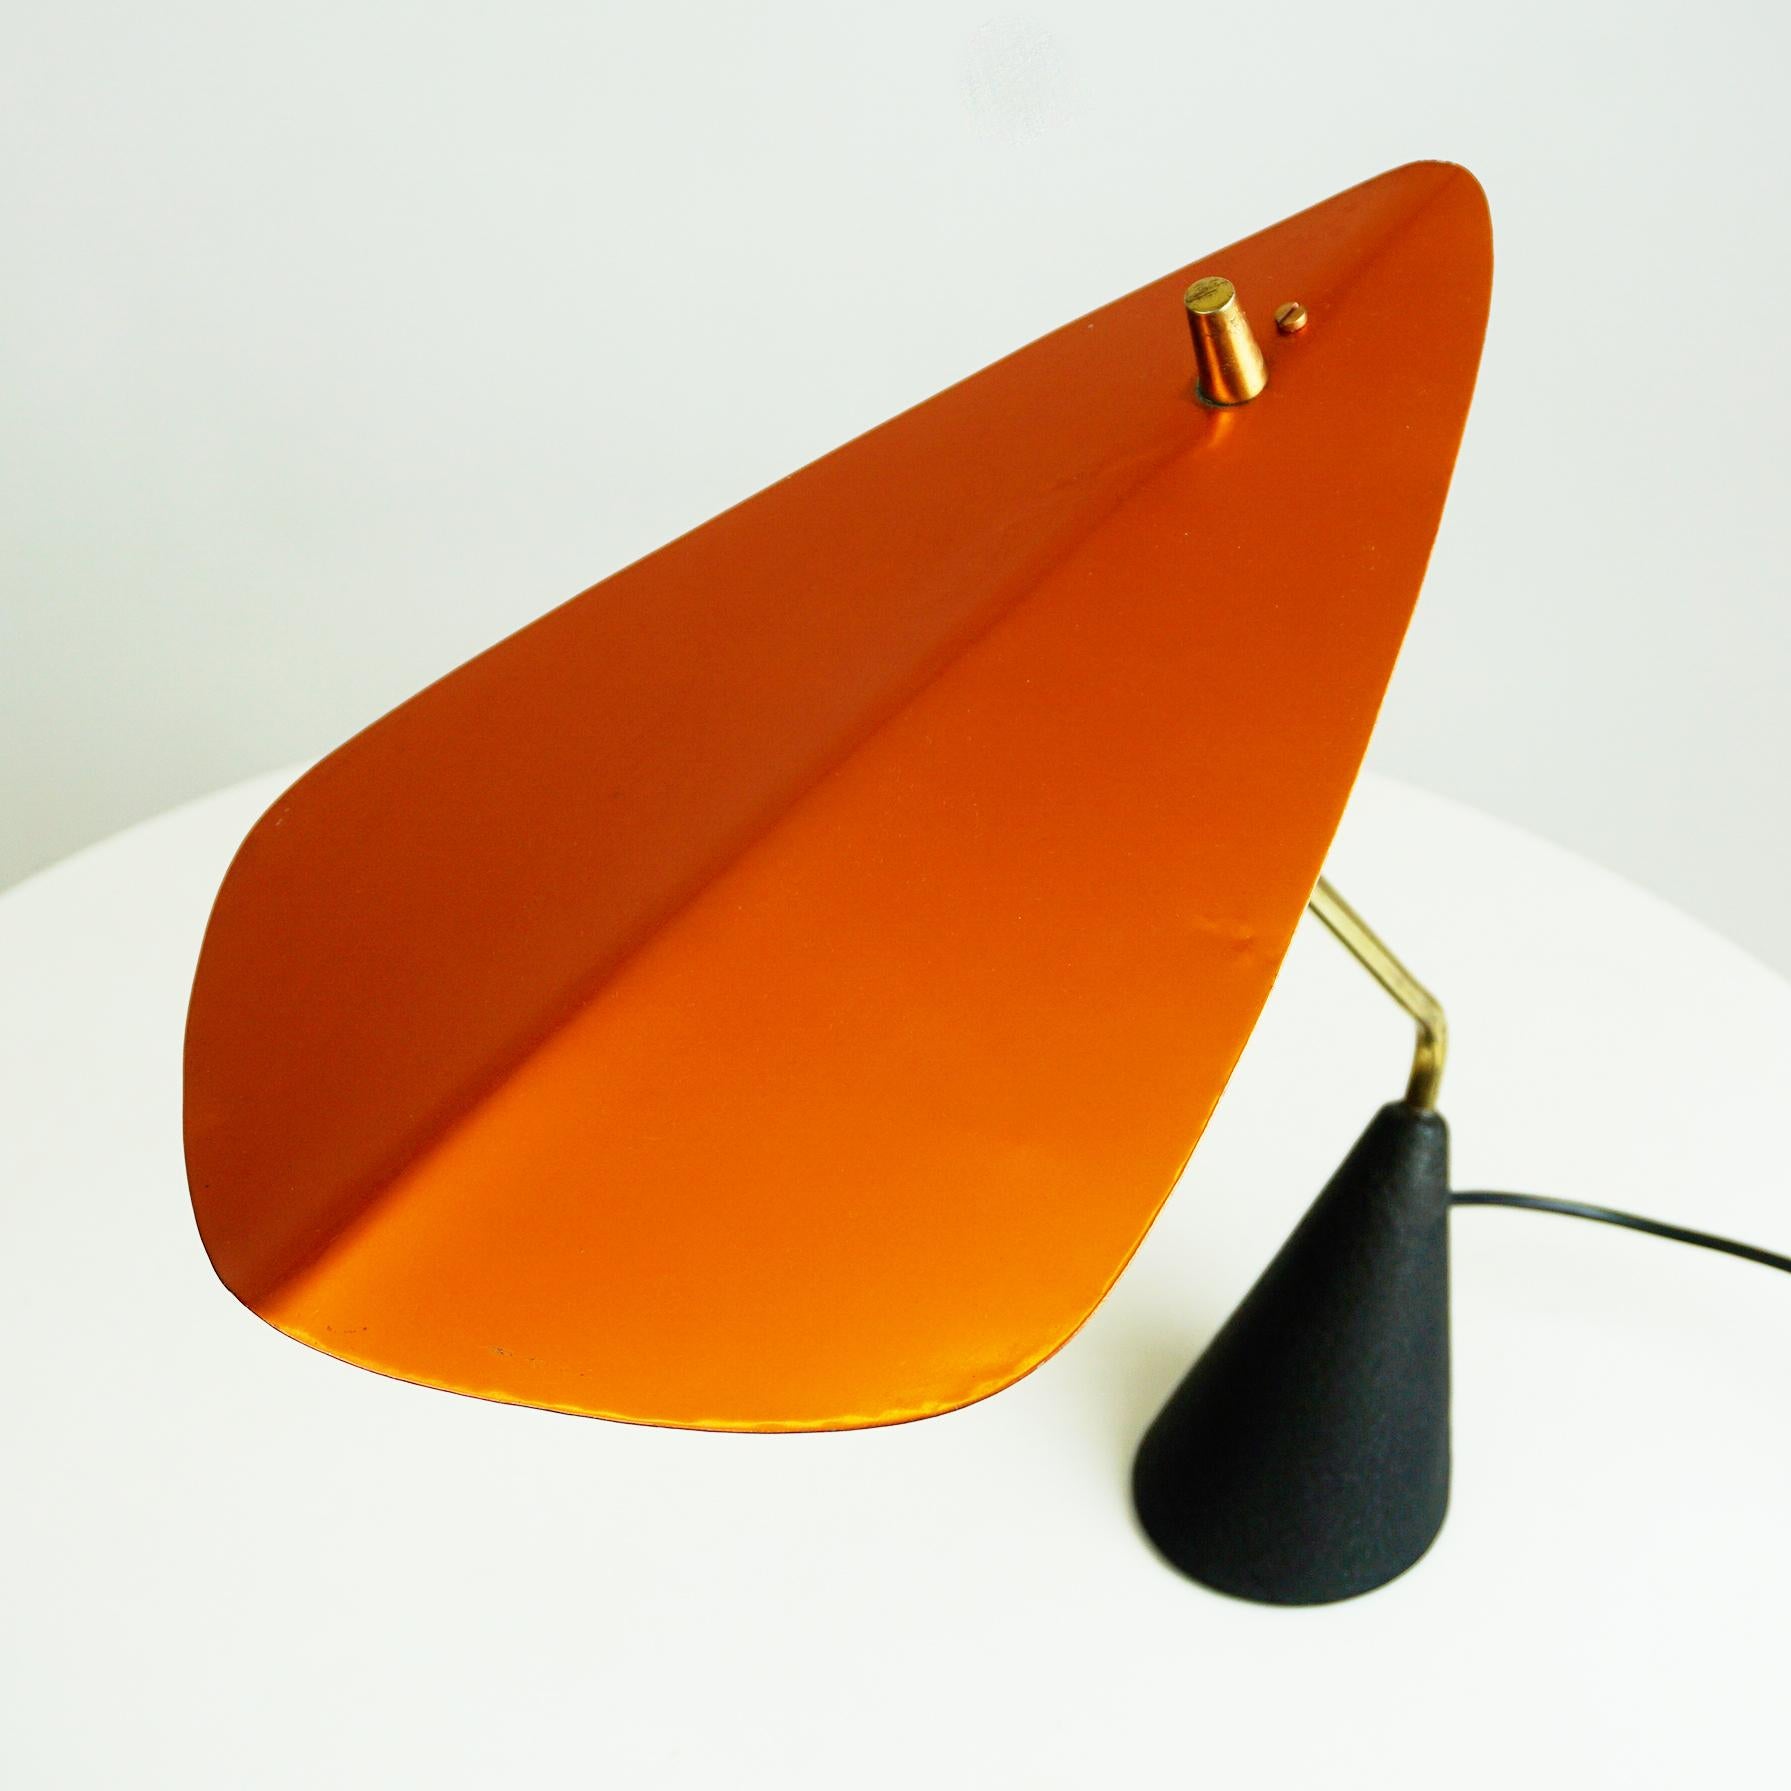 Anodized Austrian Midcentury Brass and Red Lacquered Metal Table Lamp by Hagenauer Vienna